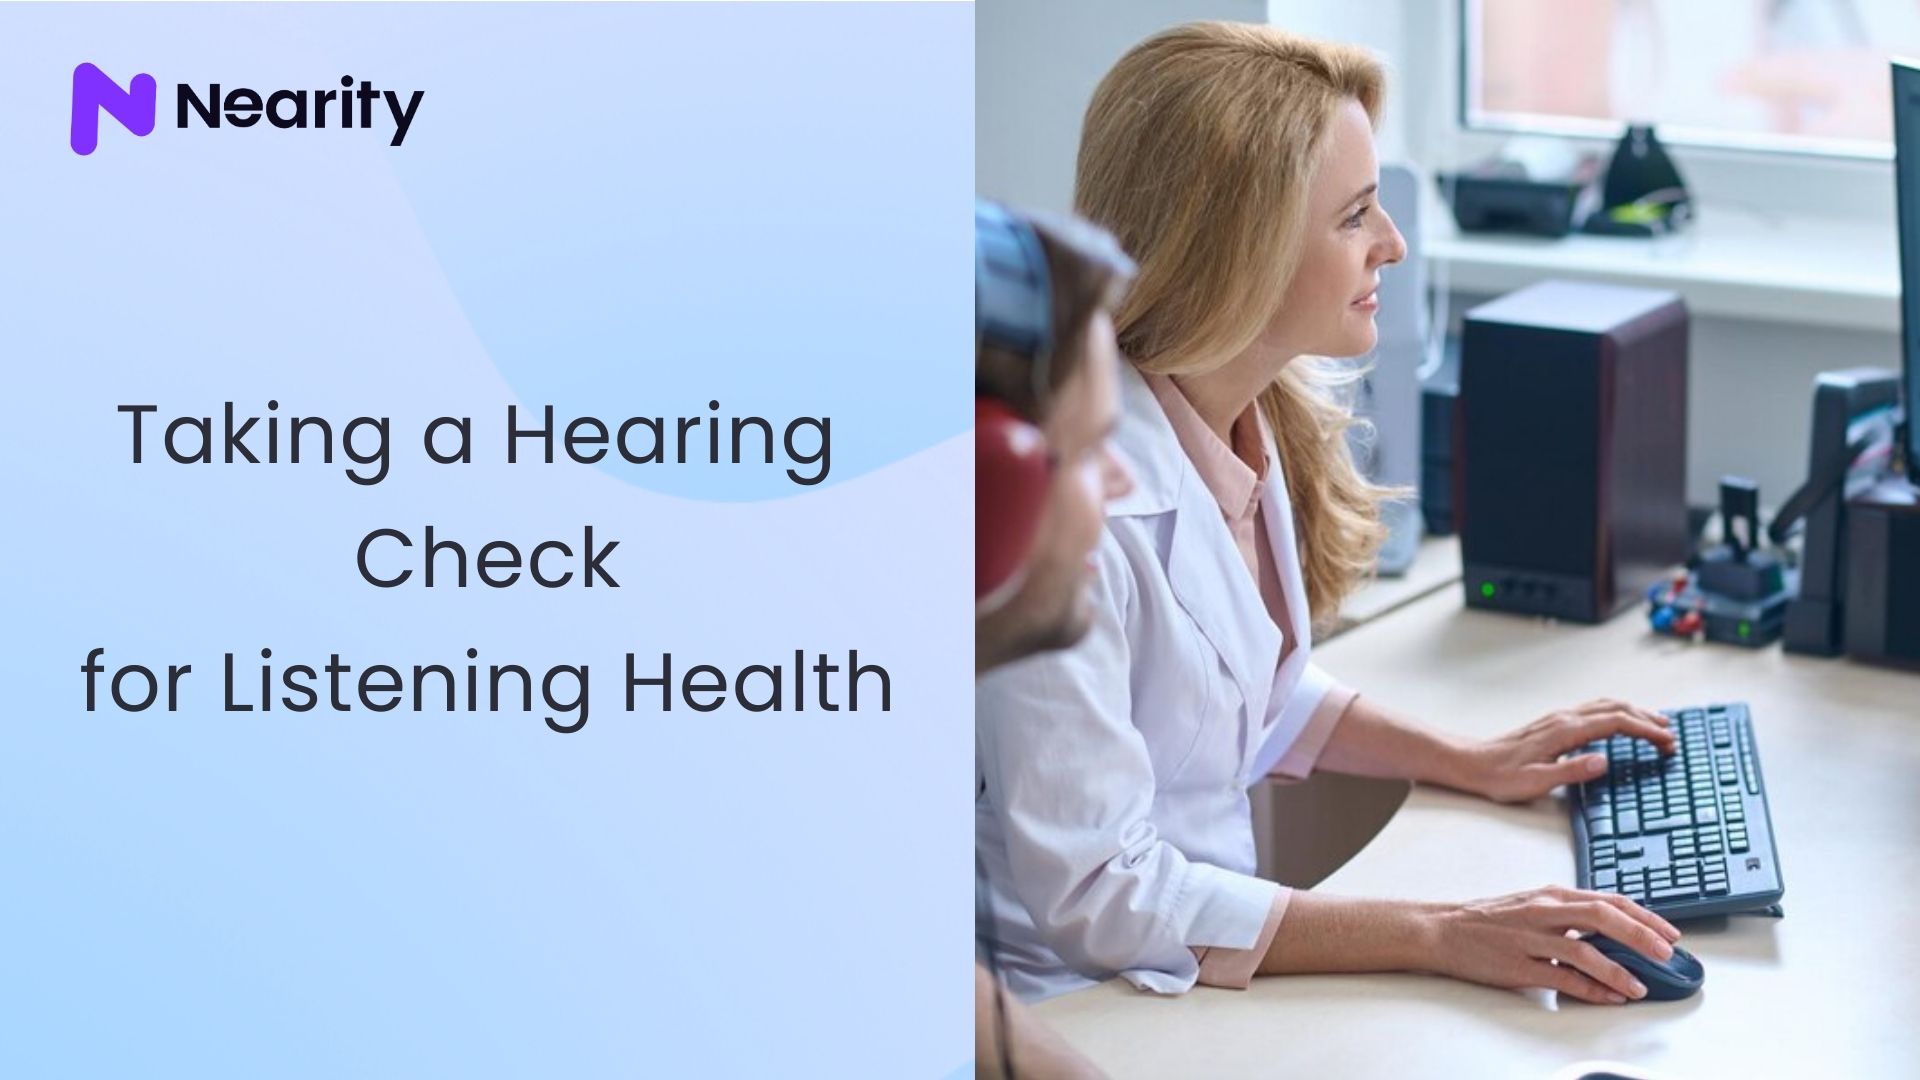 Taking a Hearing Check for Listening Health